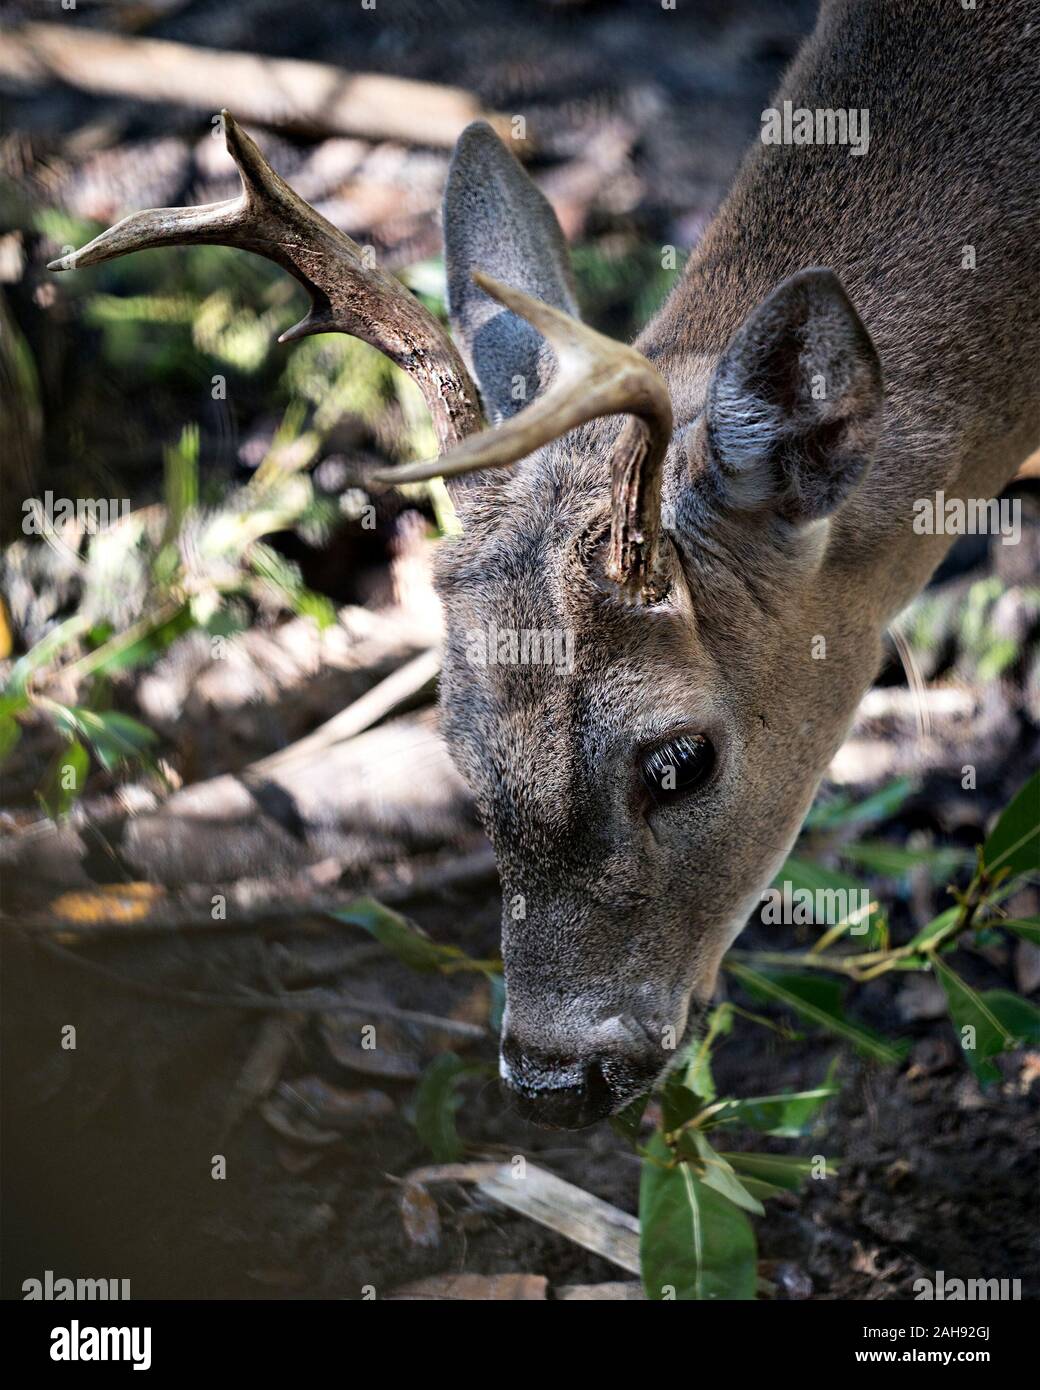 Deer Florida Key Deer close-up head view displaying head, antlers, ears, eyes, nose, with a bokeh background in its environment and surrounding. Stock Photo